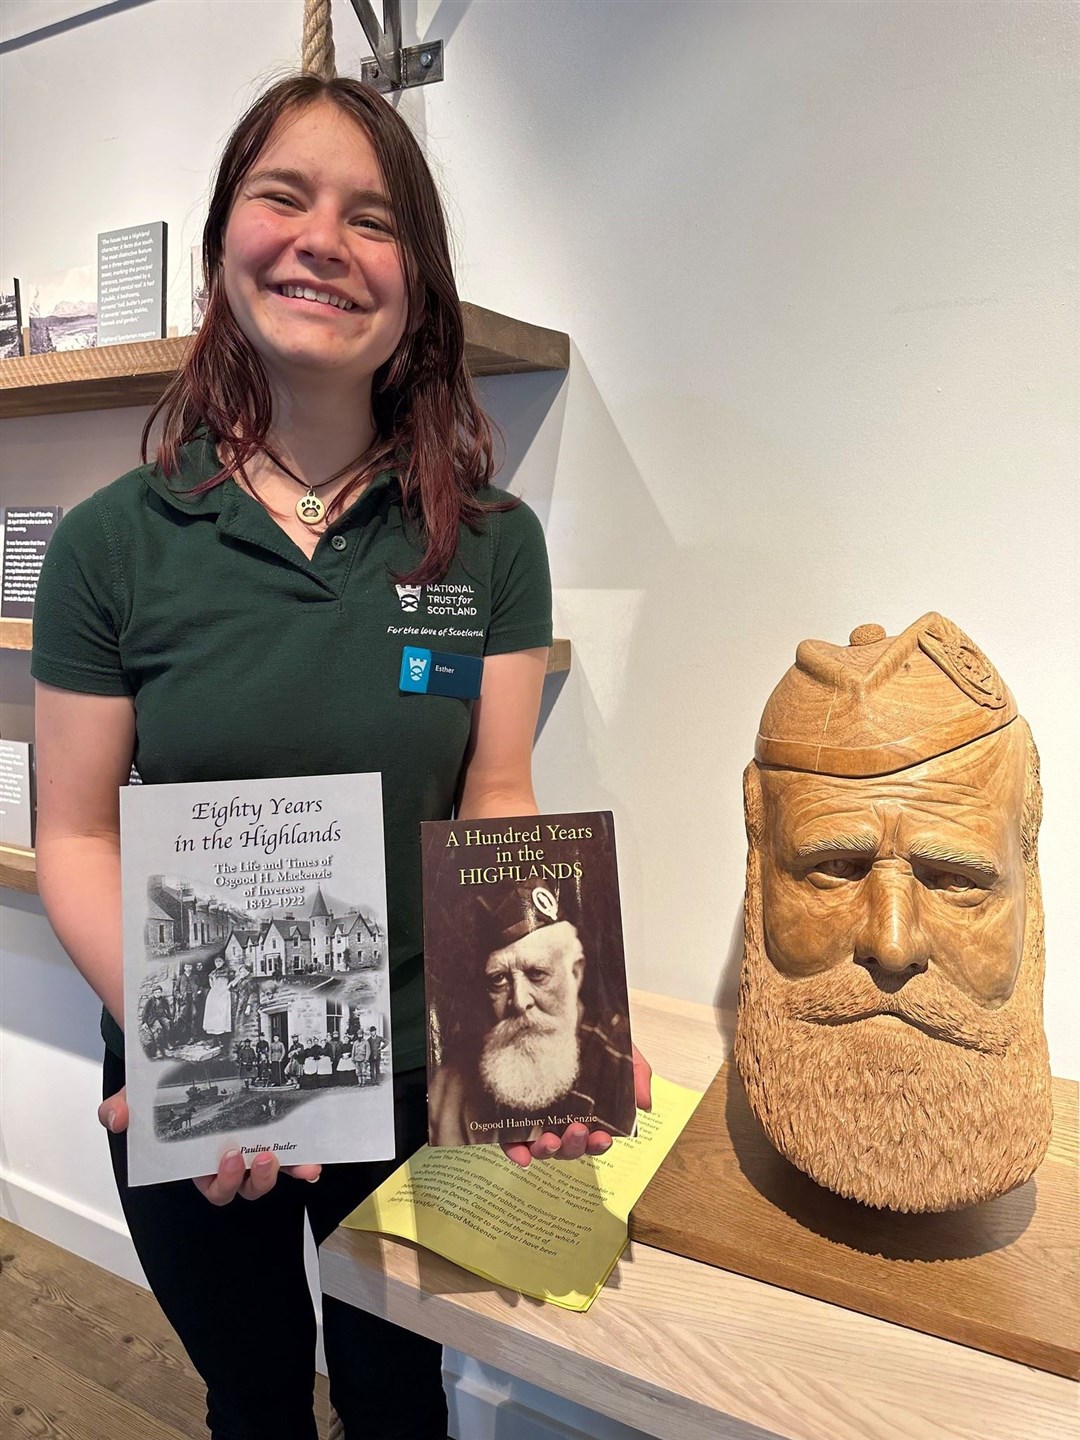 Esther Pennington, a member of NTS staff at Inverewe, with the books which helped inspire the play.